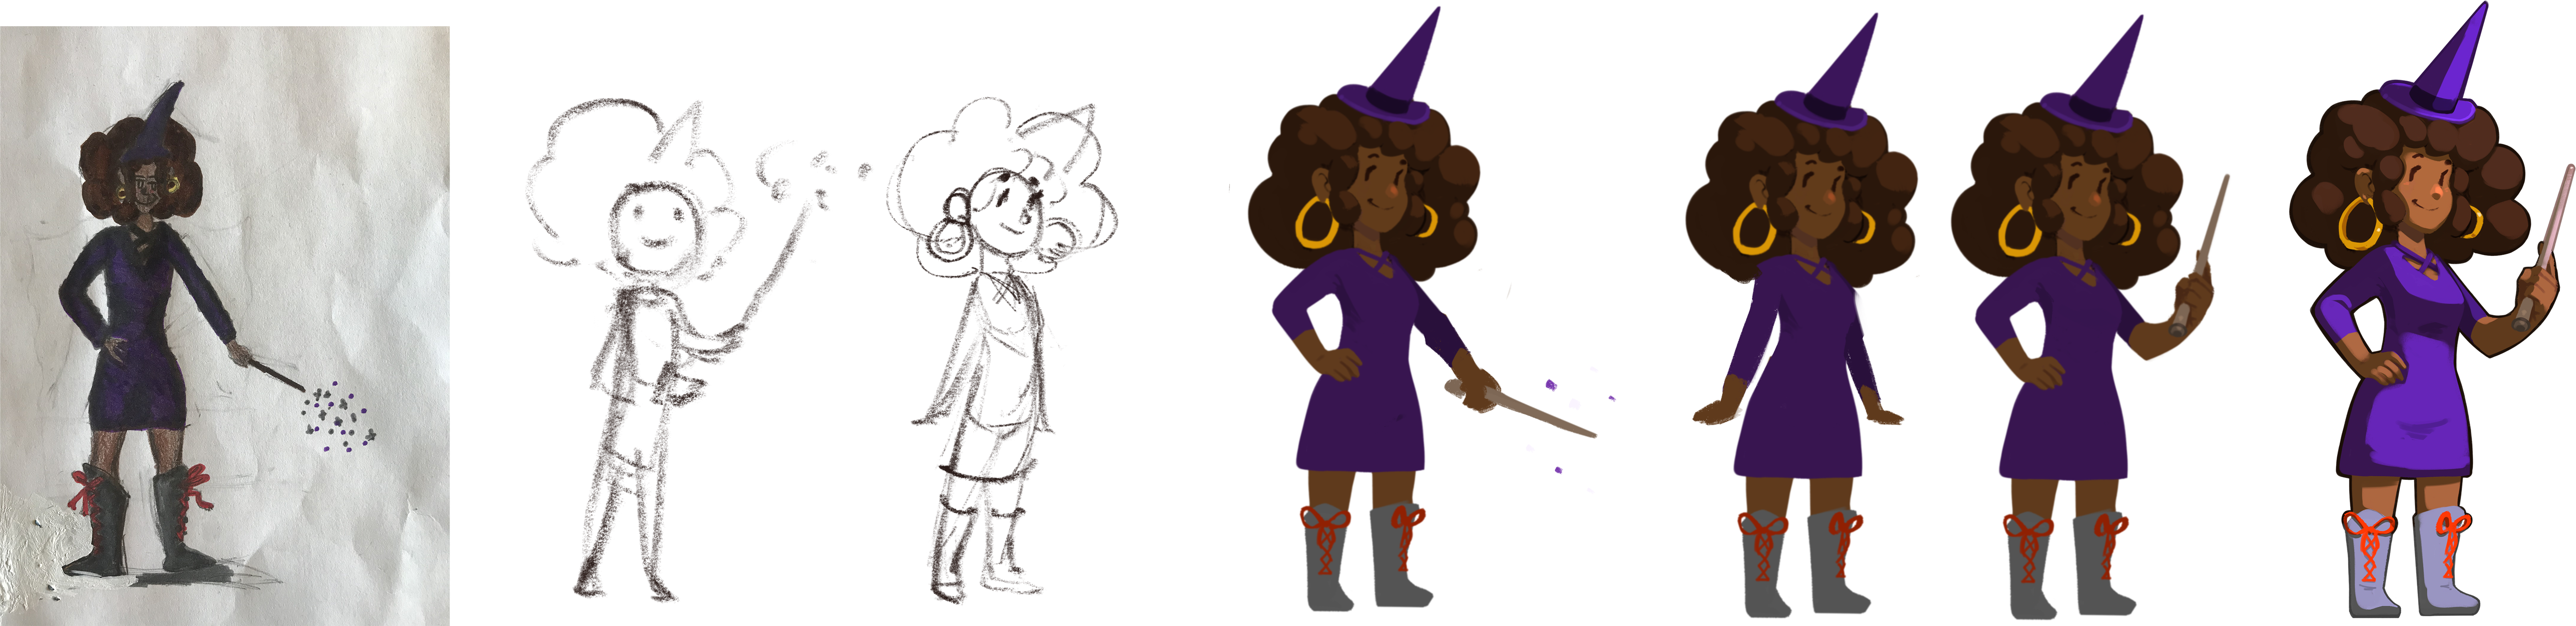 Abigail_Elementary_Witch.png